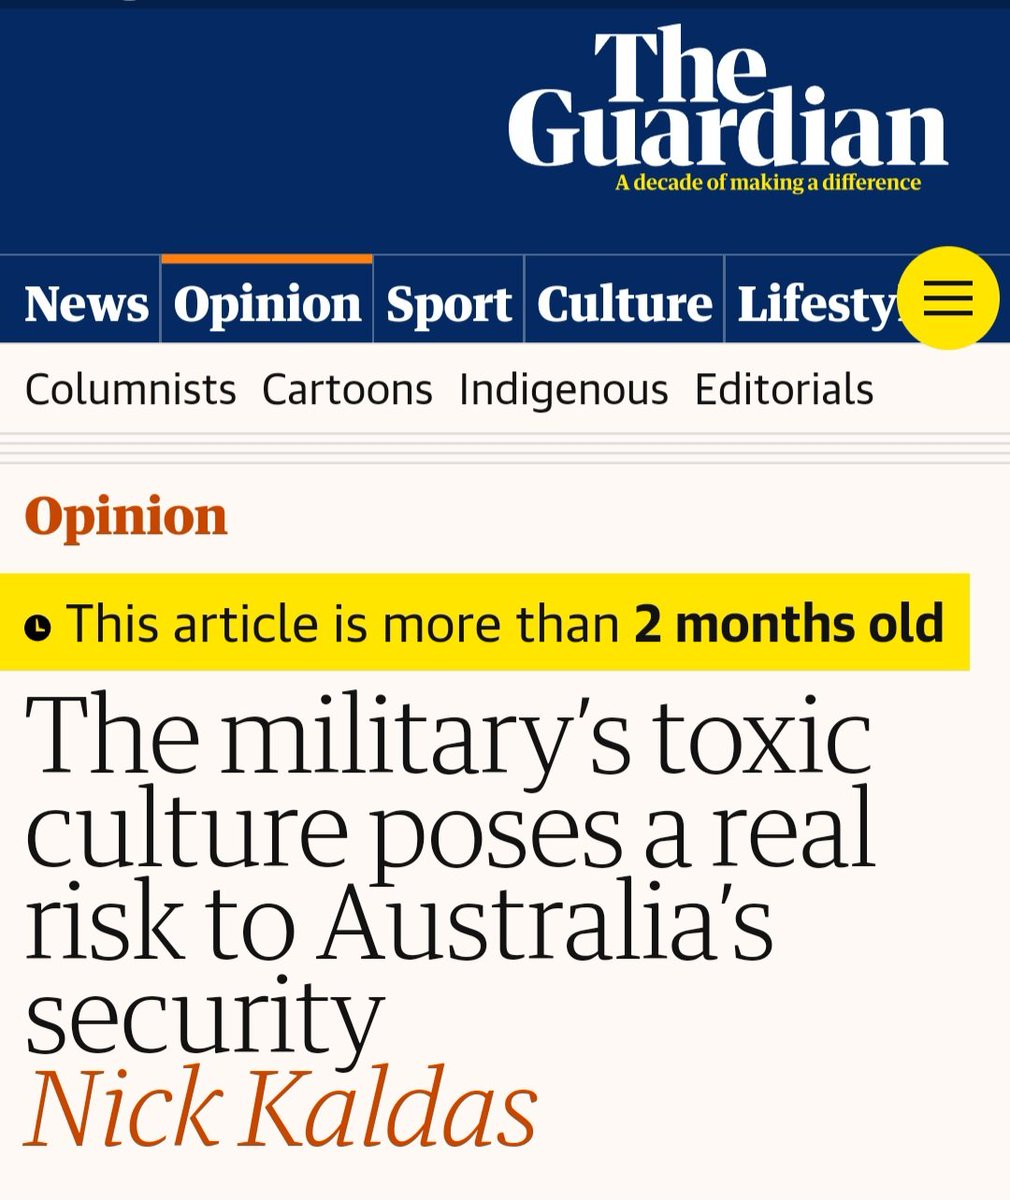 One of the main reasons we have such shitty ADF leadership at the moment is their coterie of media sycophants with their misrepresentations of facts. Fix Australia's broken media, you'll improve our democracy and governance overnight. Until then, we're stuck with this kind of